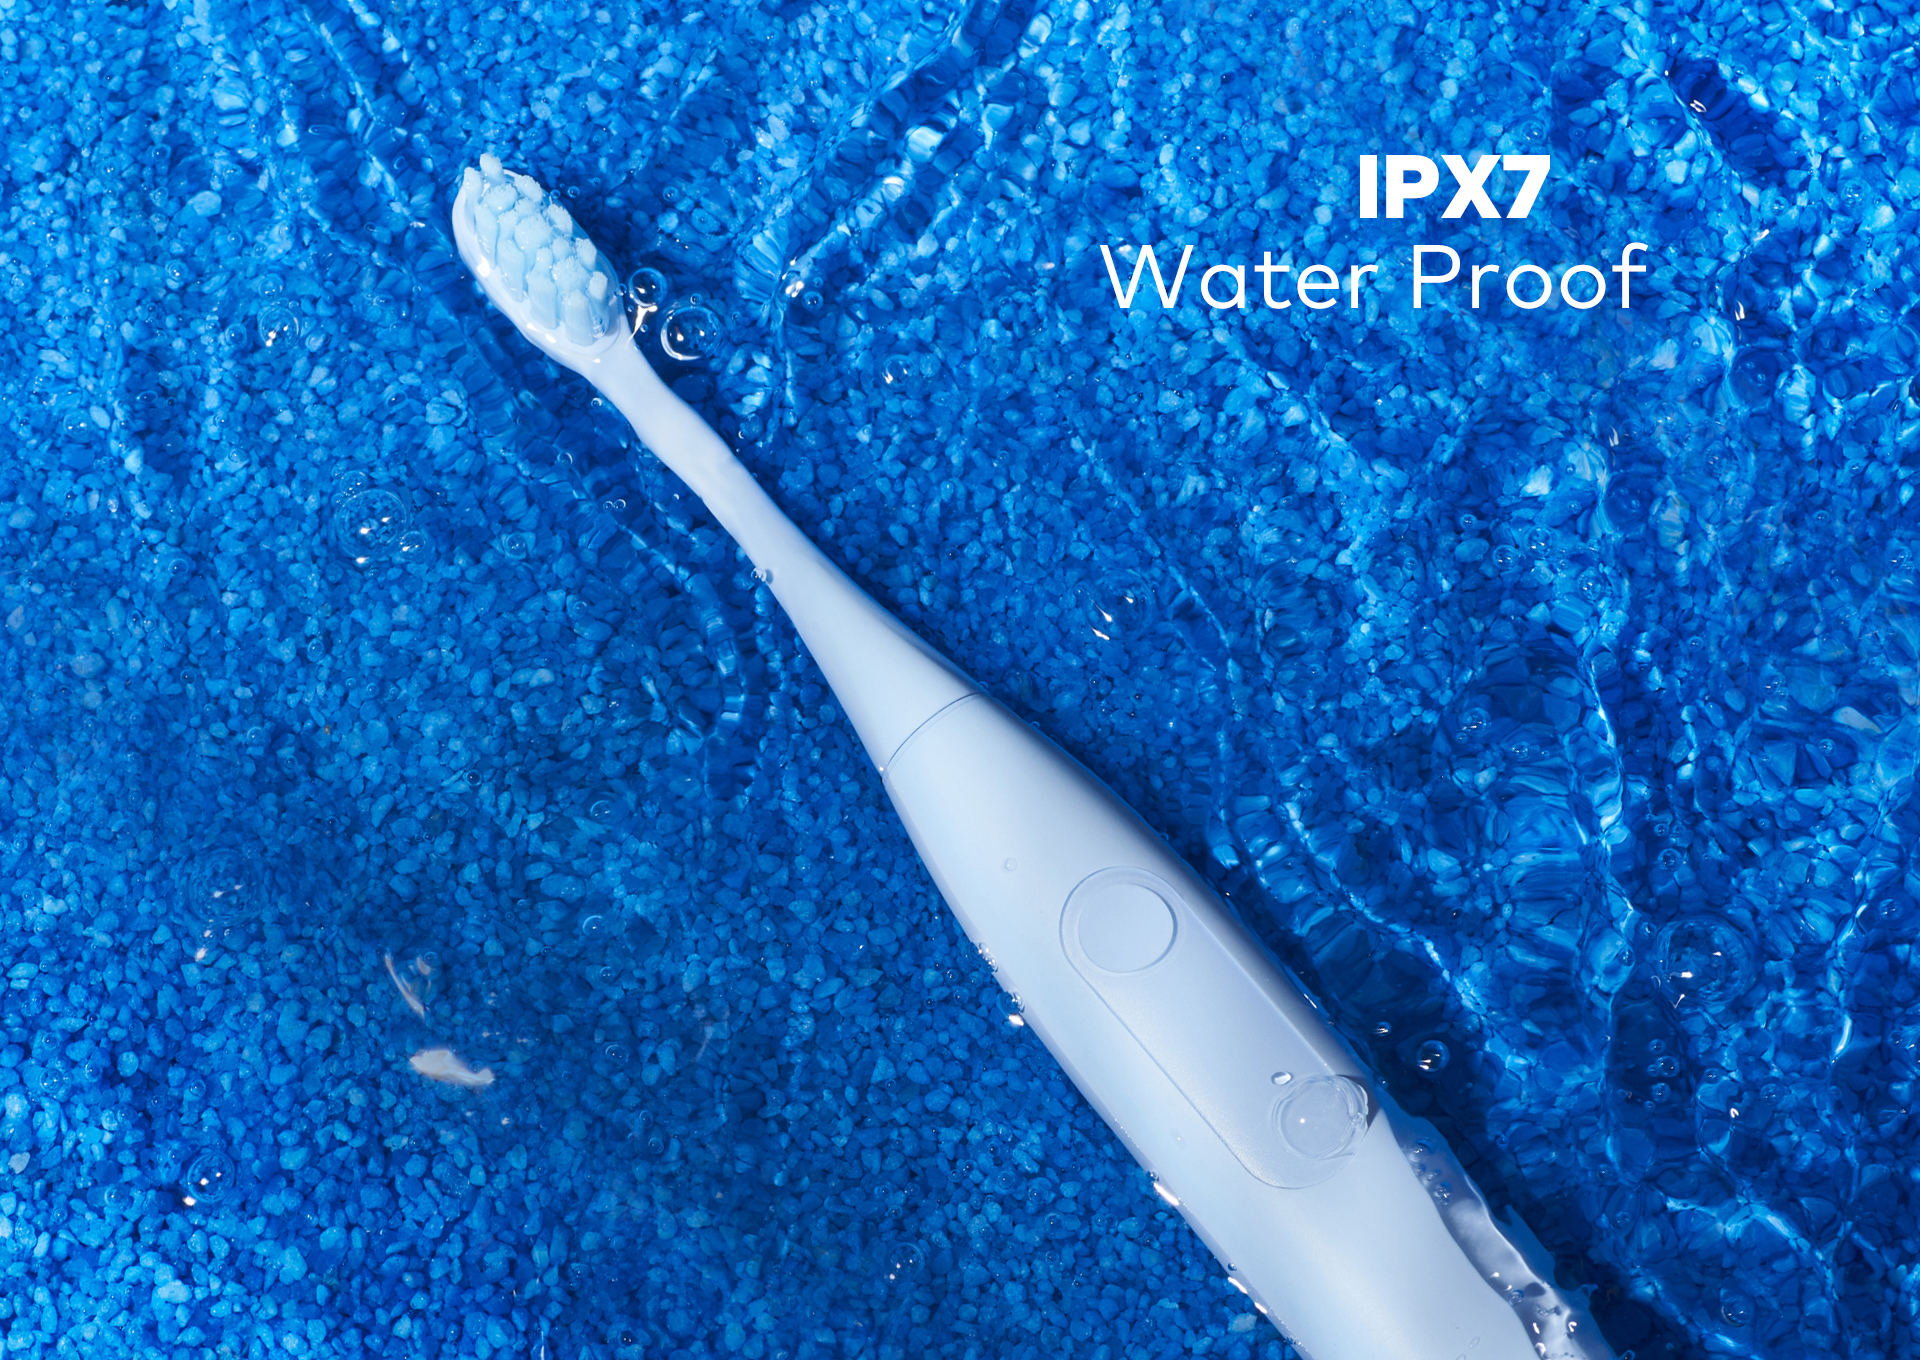 IPX7 Water Proof